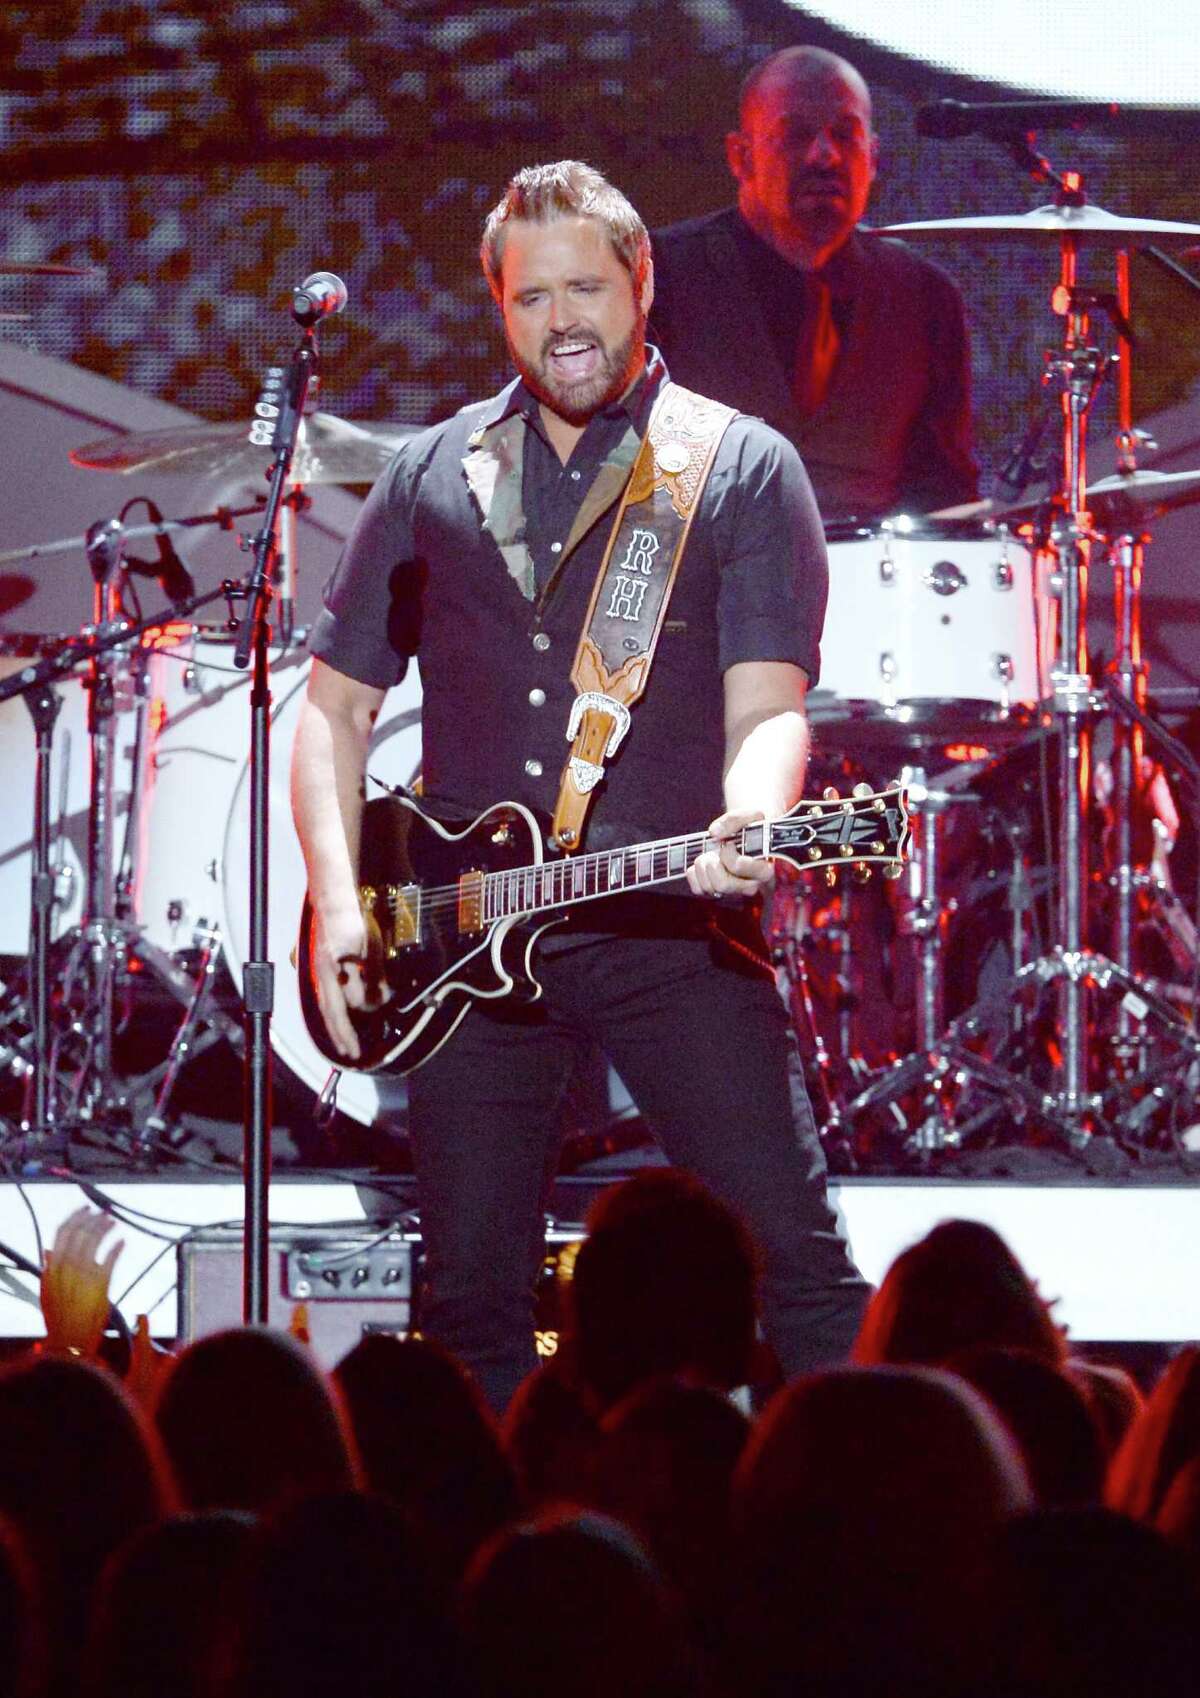 Randy Houser will play the rodeo on Feb. 23.